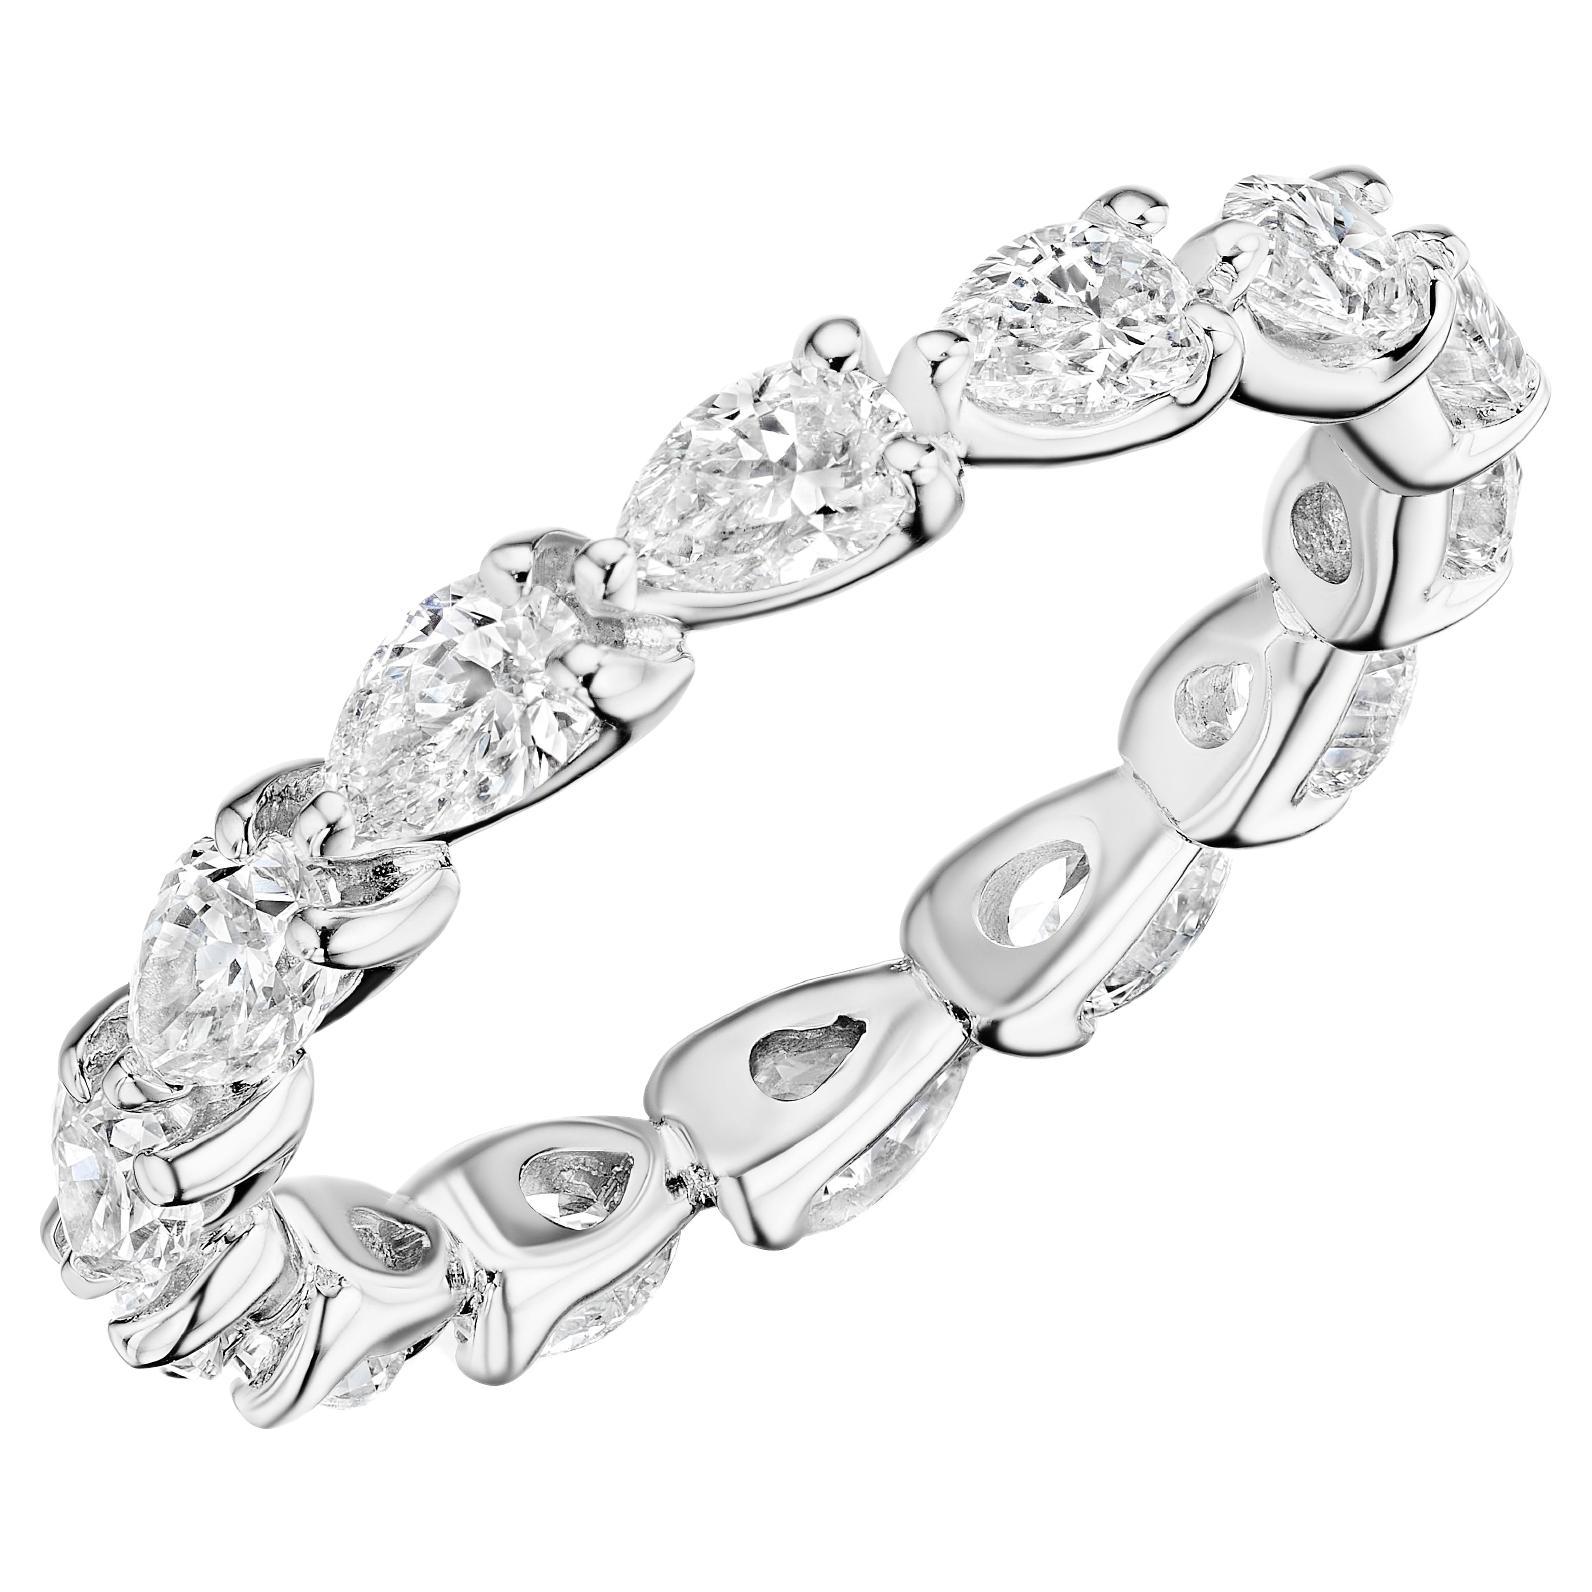 • Crafted in 18KT gold, this eternity band is made with 14 pear shape diamonds which encircle the finger, and has a combining total weight of approximately 2.00 carats. Worn beautifully on its own or stacked with additional rings.  A beautiful and